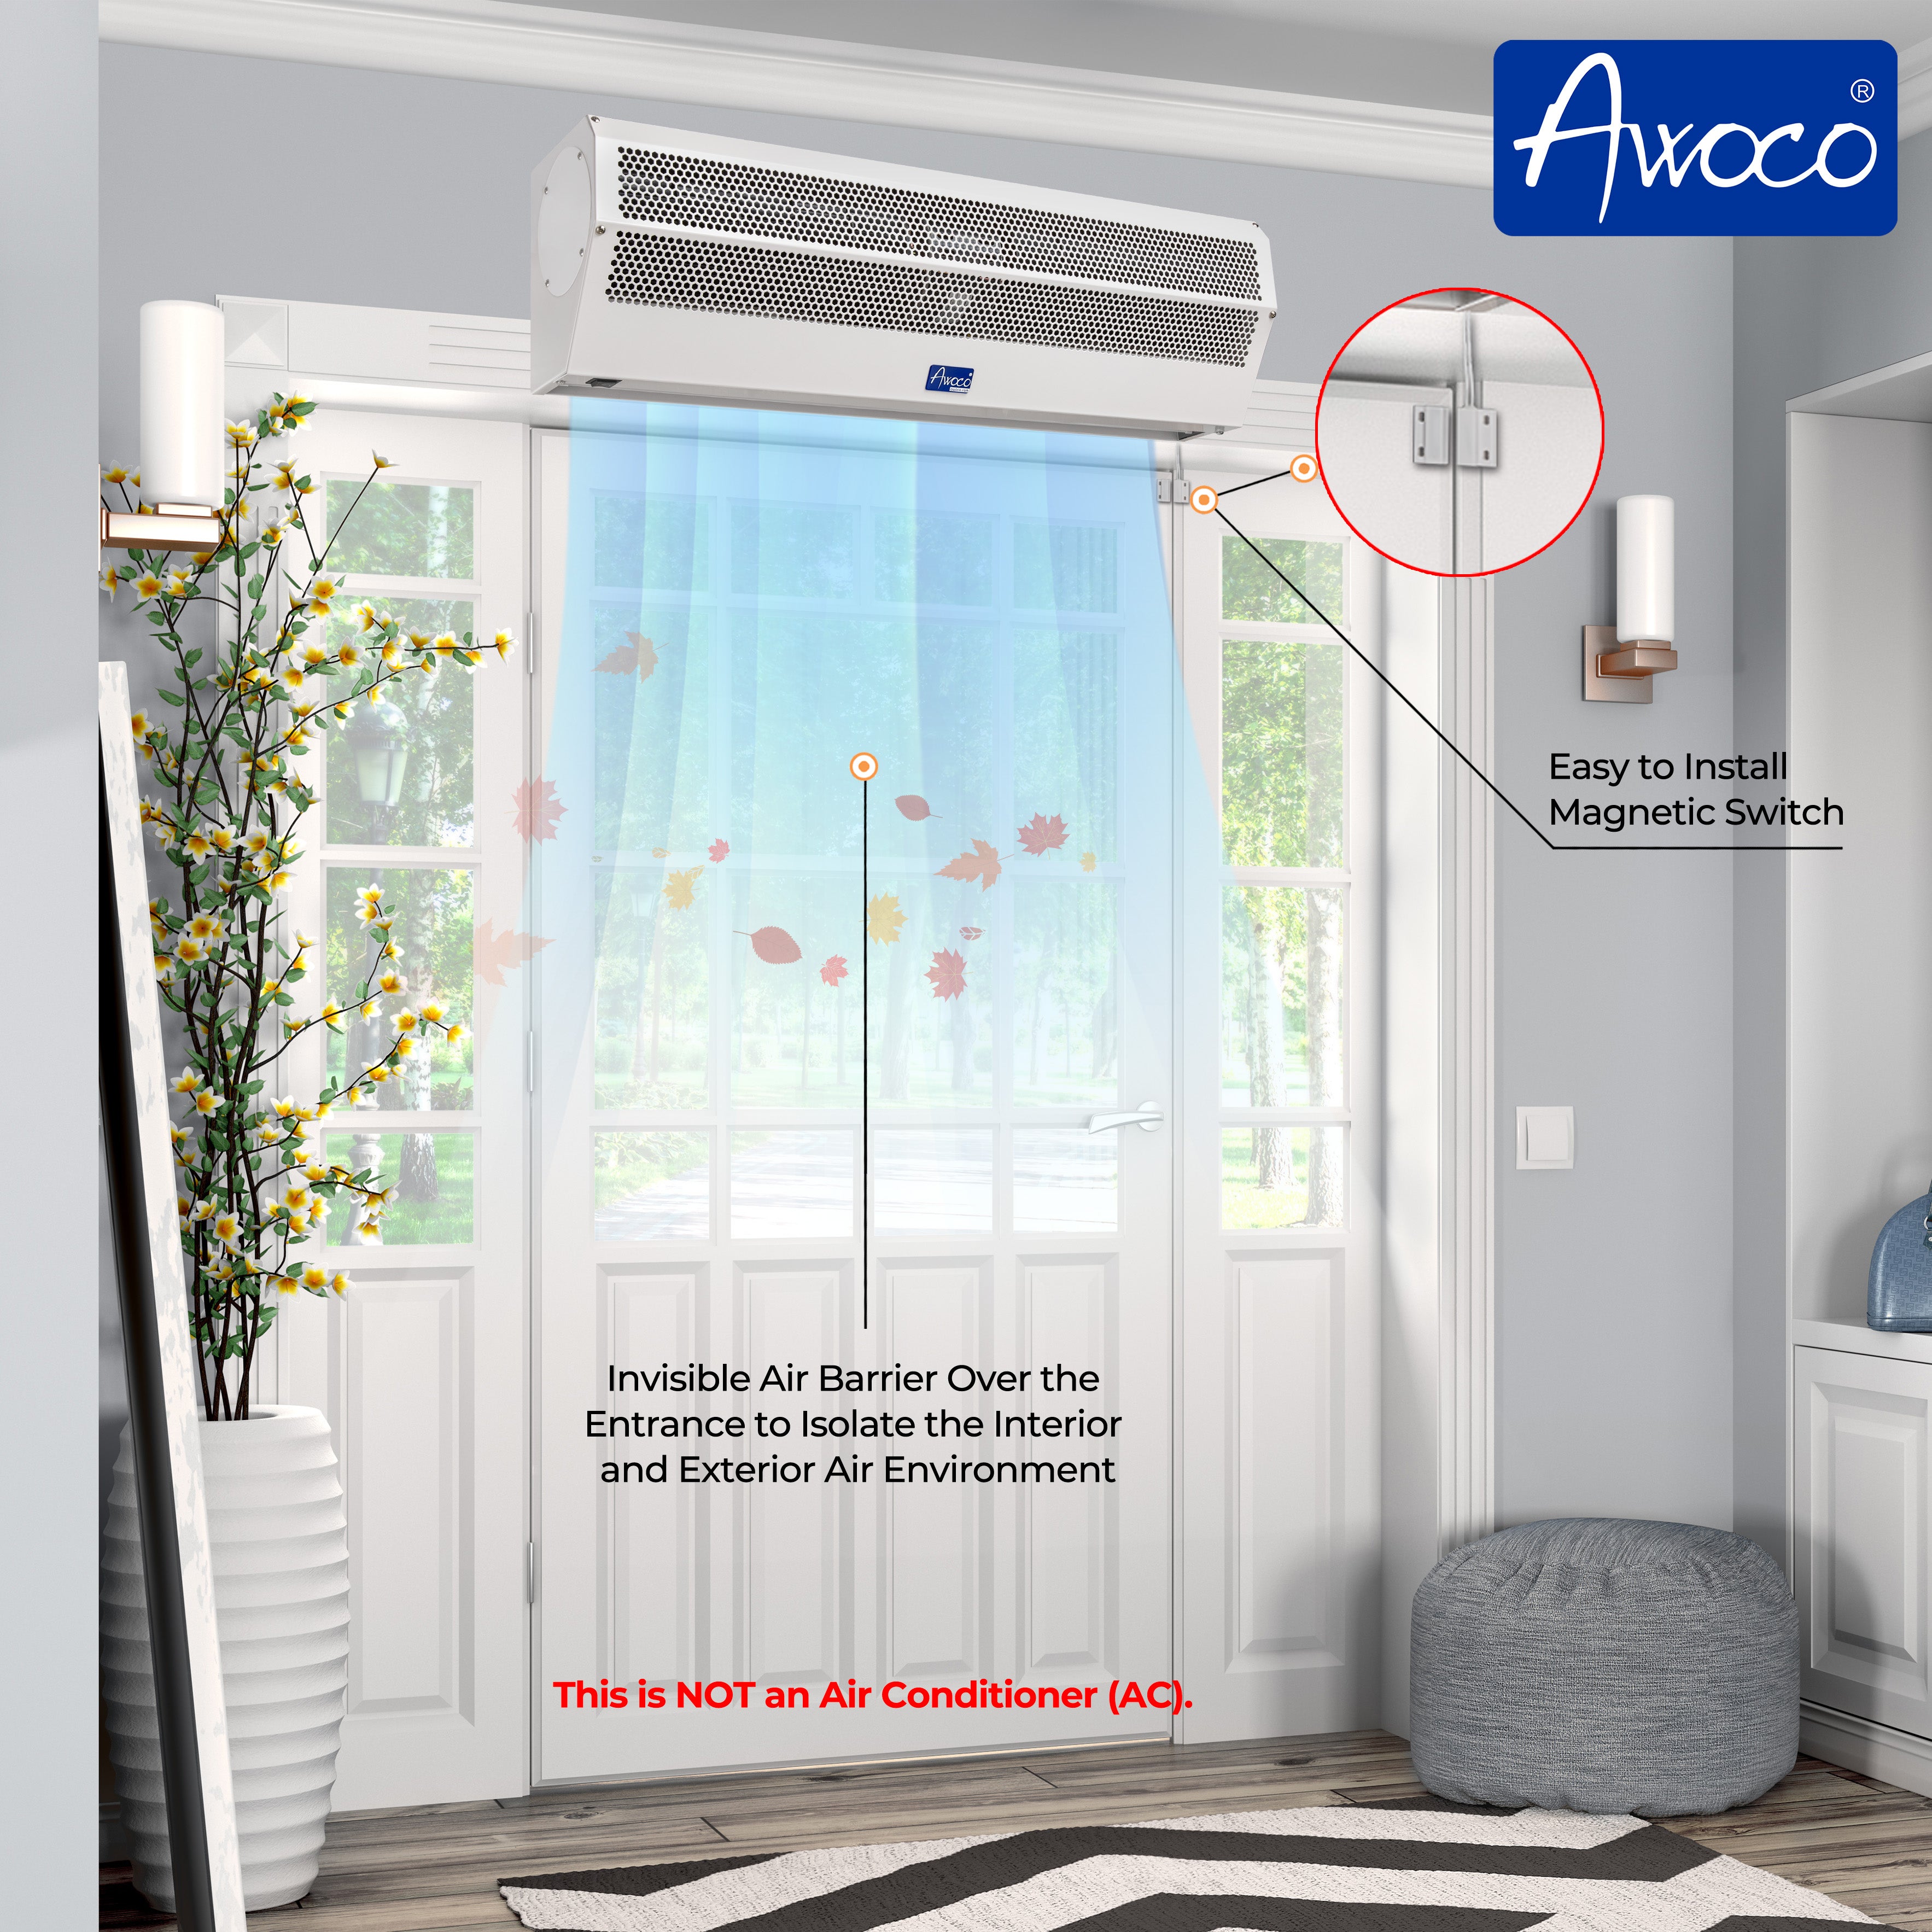 Awoco 42” Super Power 2 Speeds 1350 CFM Commercial Indoor Air Curtain, UL Certified, 120V Unheated with an Easy-Install Magnetic Switch, 3 Year Warranty